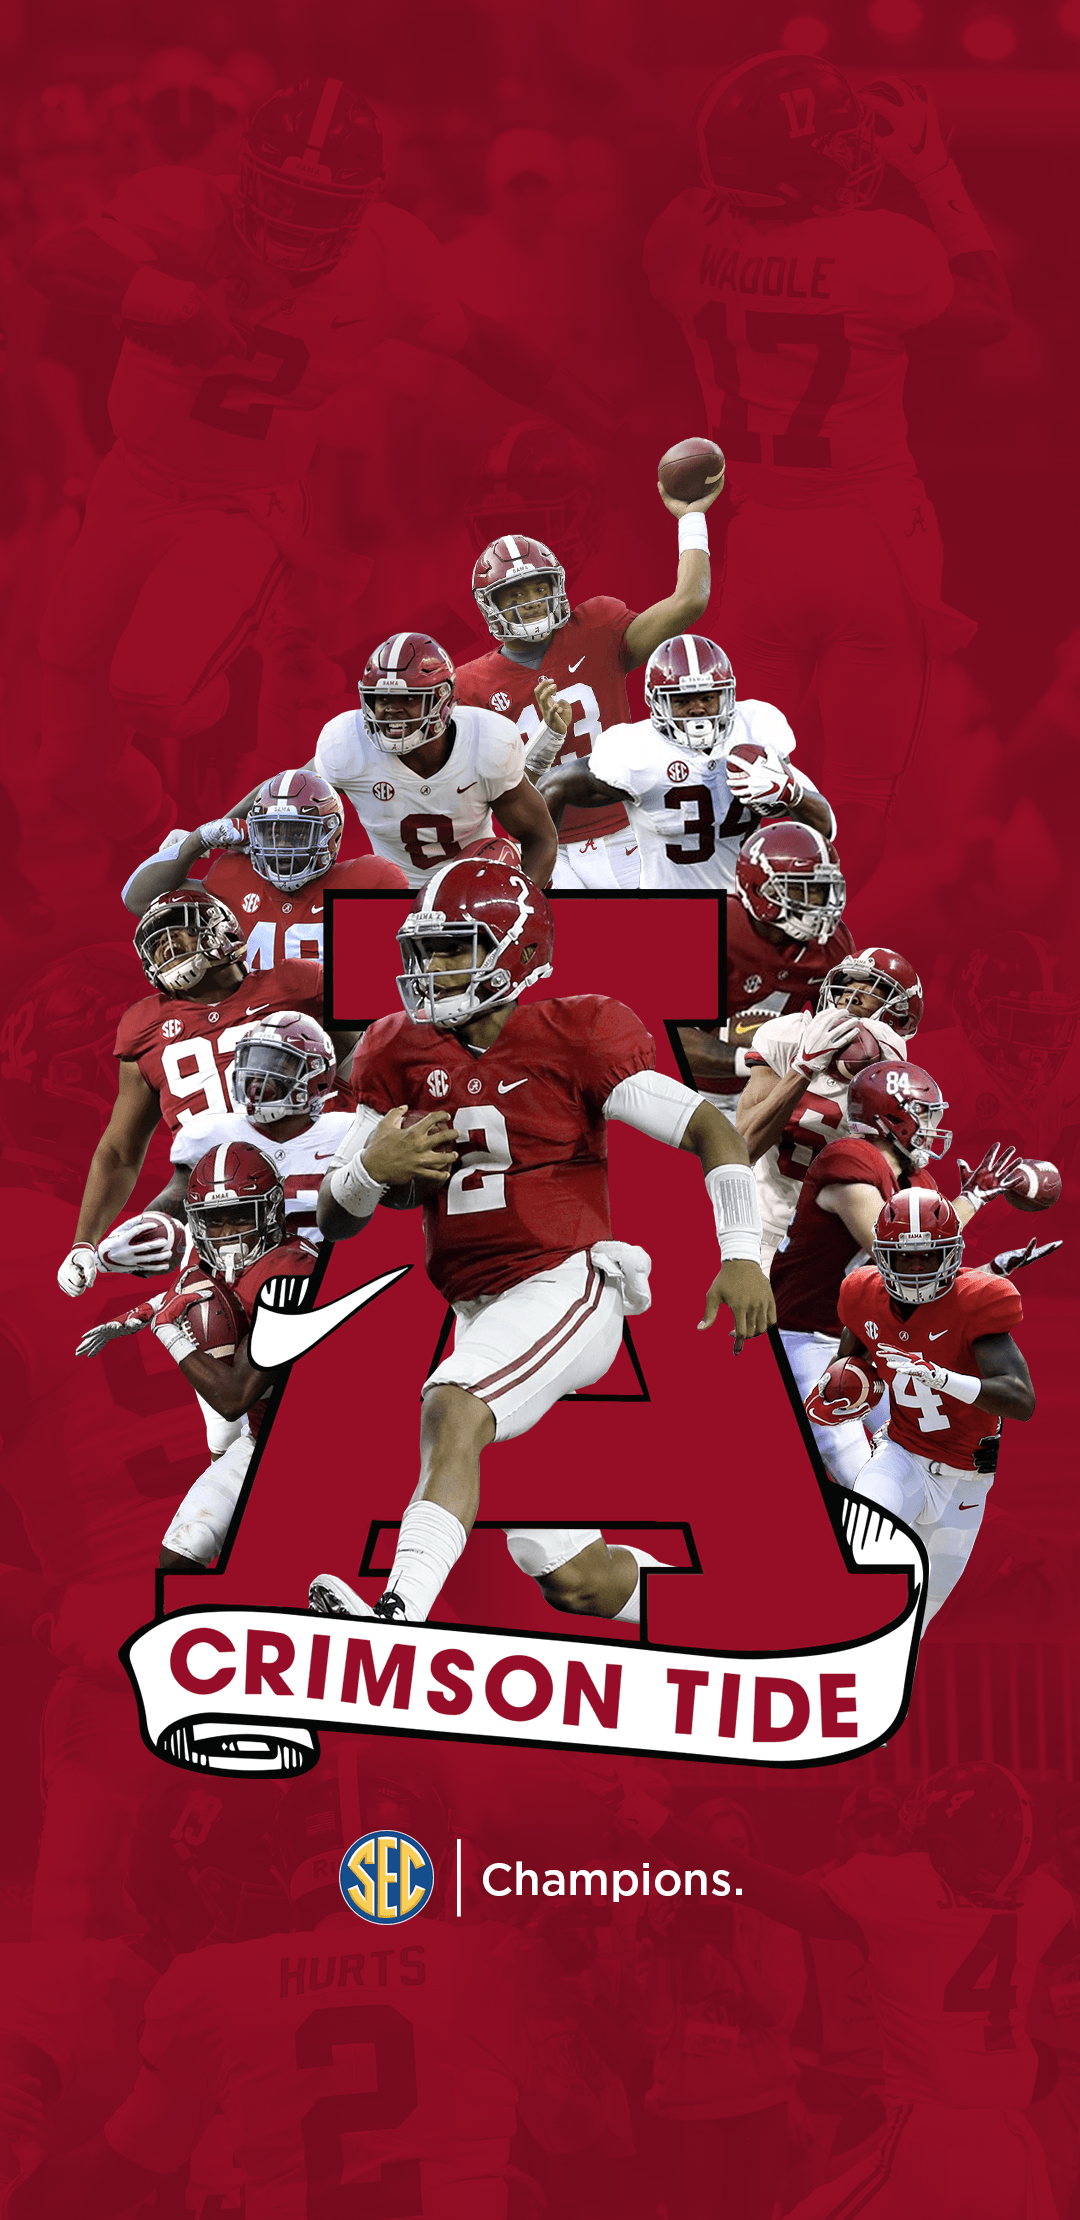 SEC Champions Phone Wallpaper more options in the comments